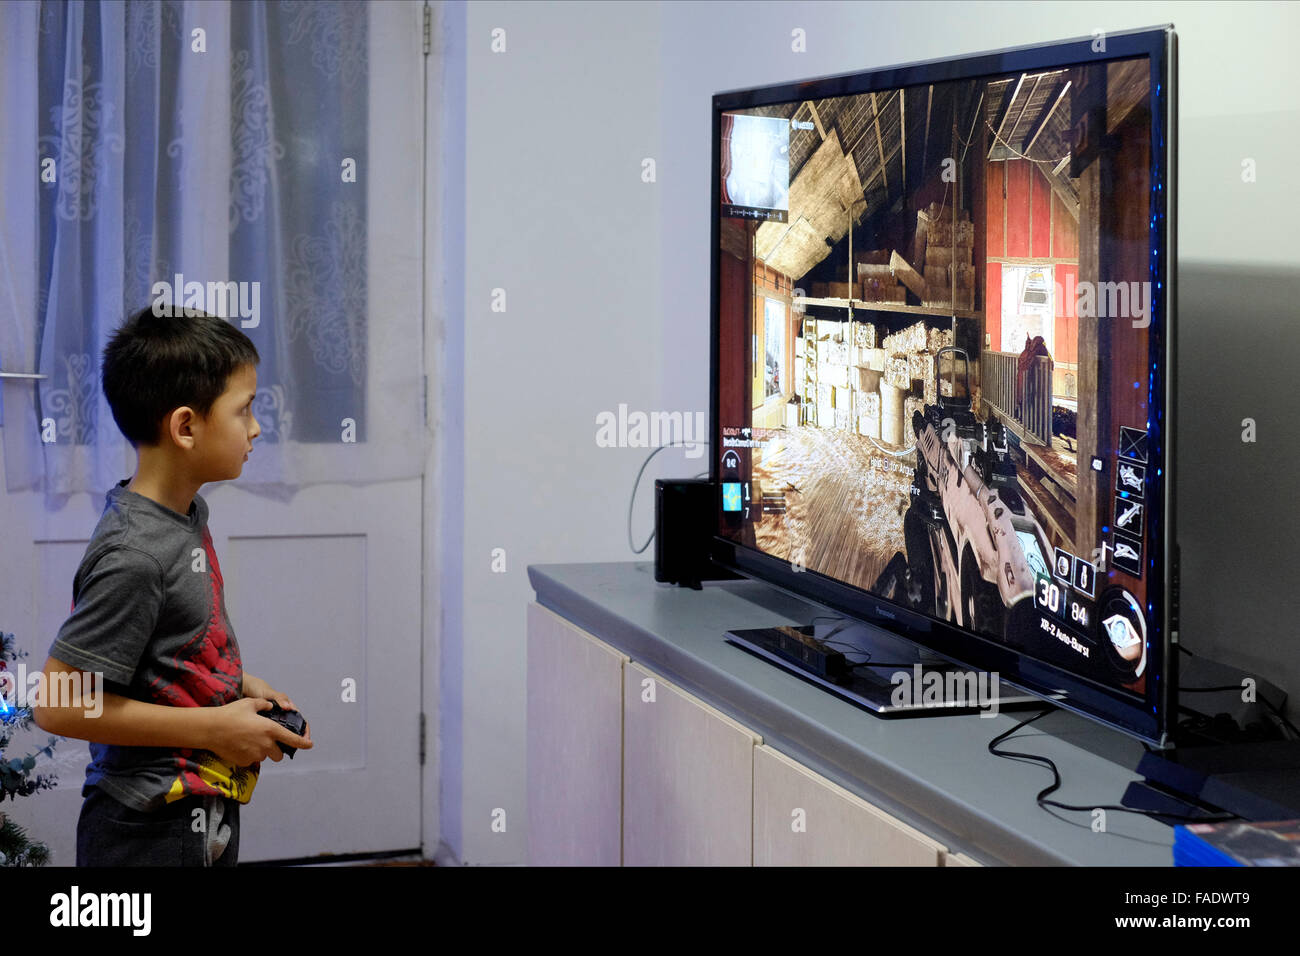 young boy playing video game on big flat screen tv in england uk Stock Photo